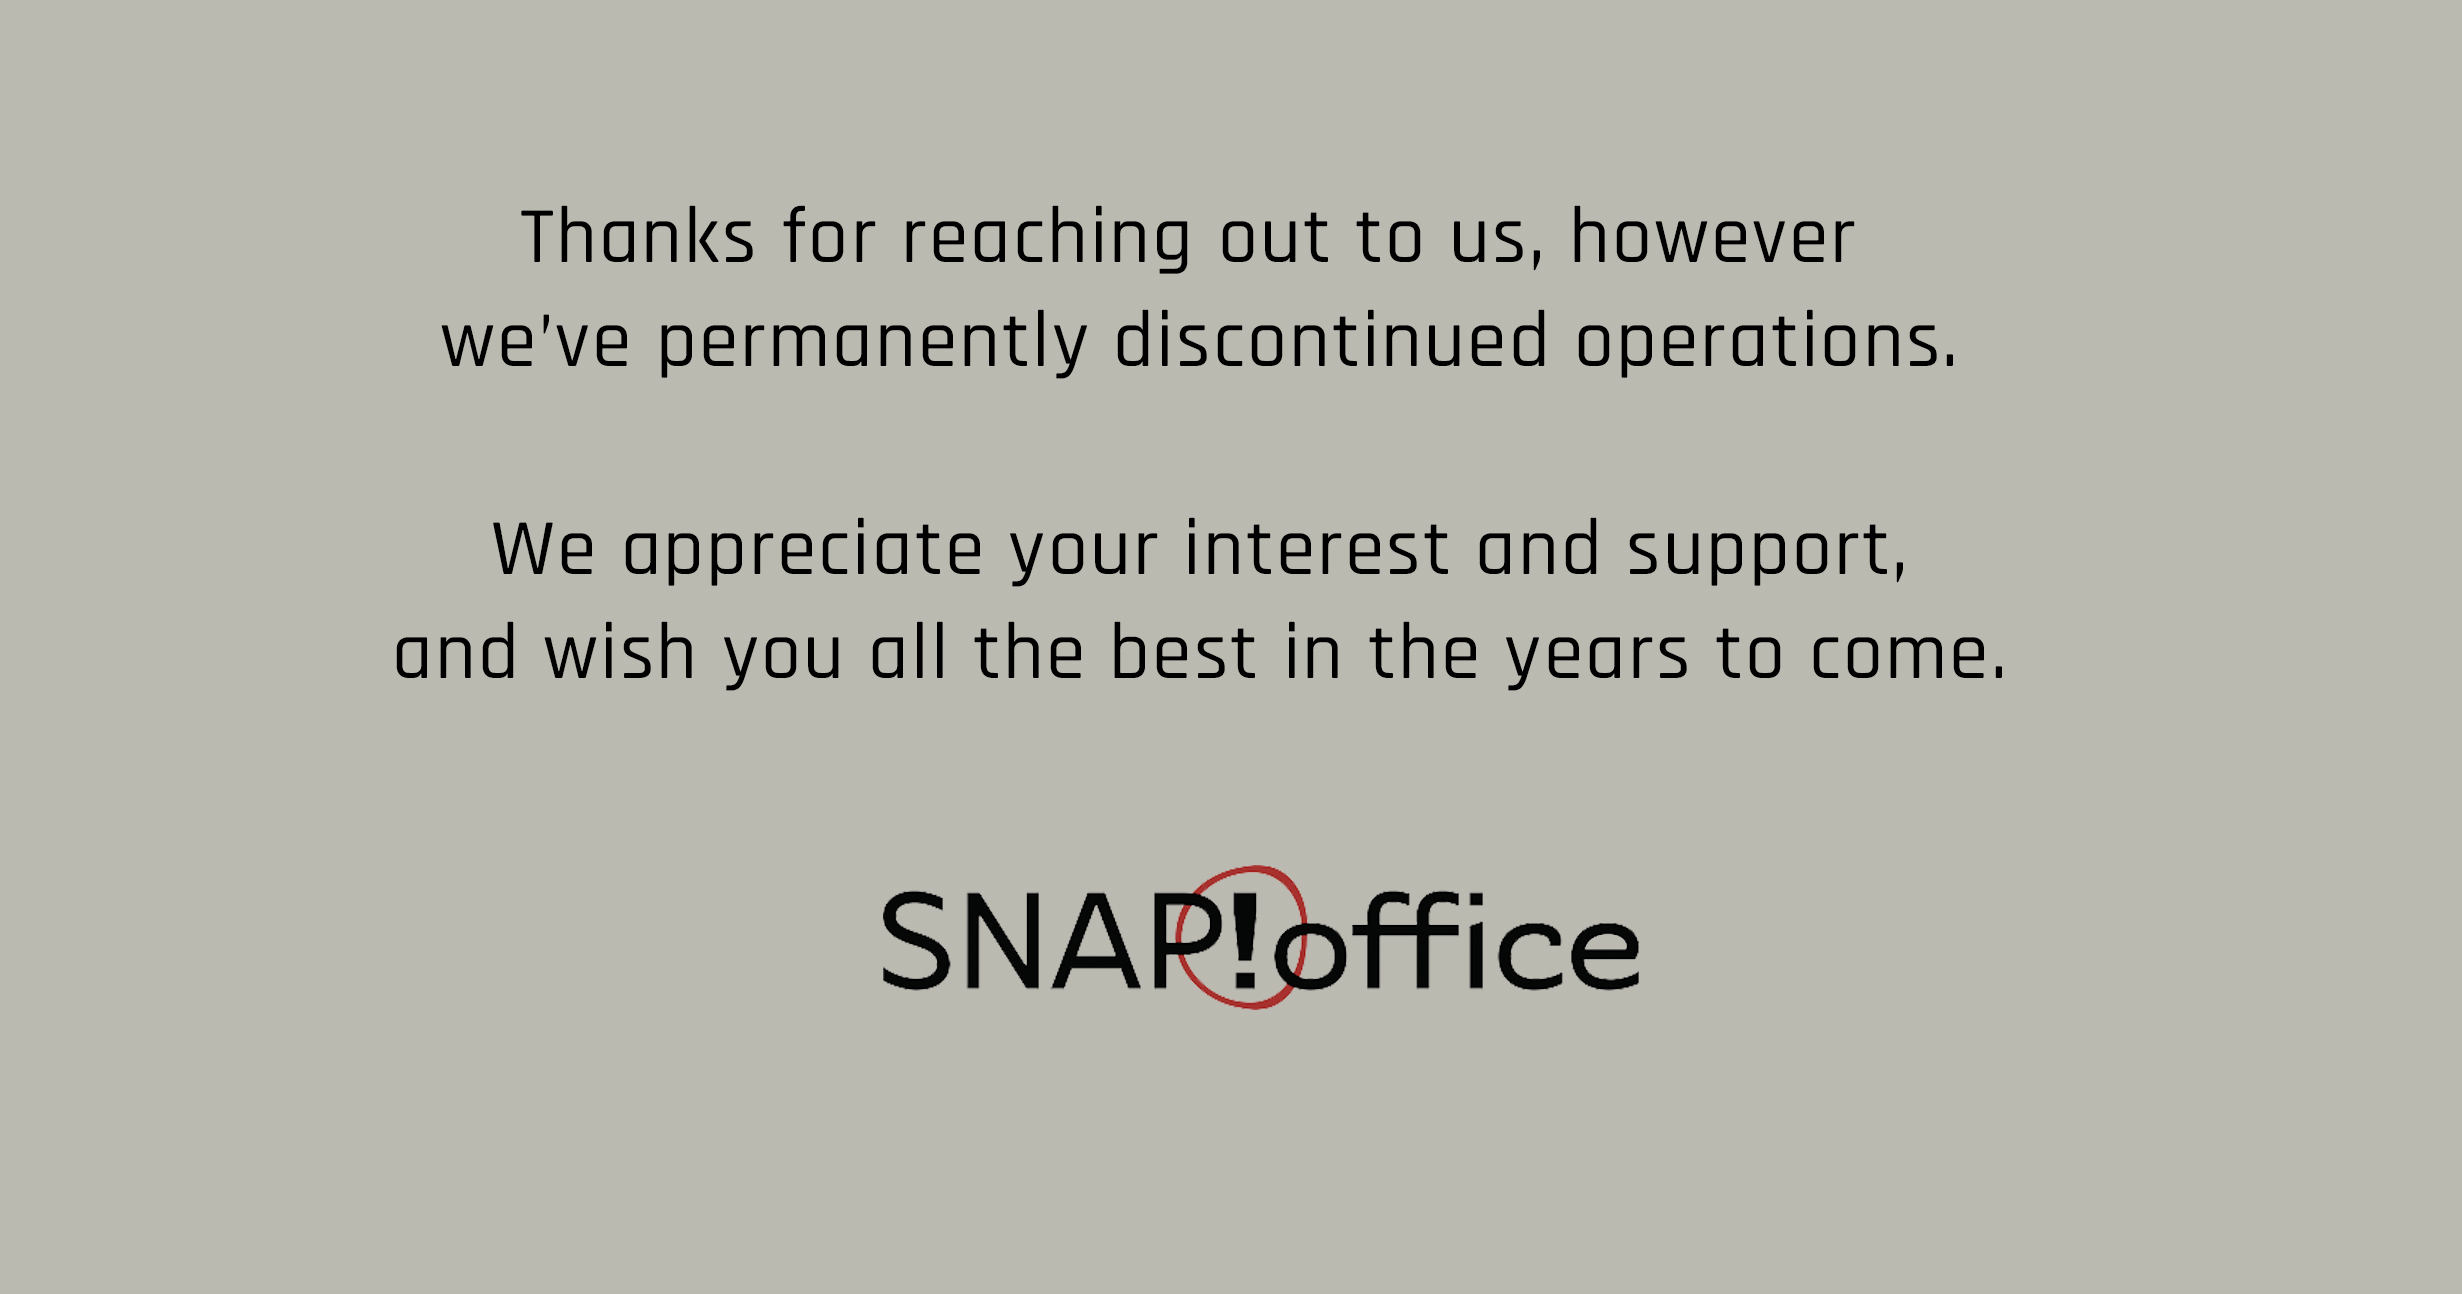 Thanks for reaching out to us, however we've permanently discontinued operations.